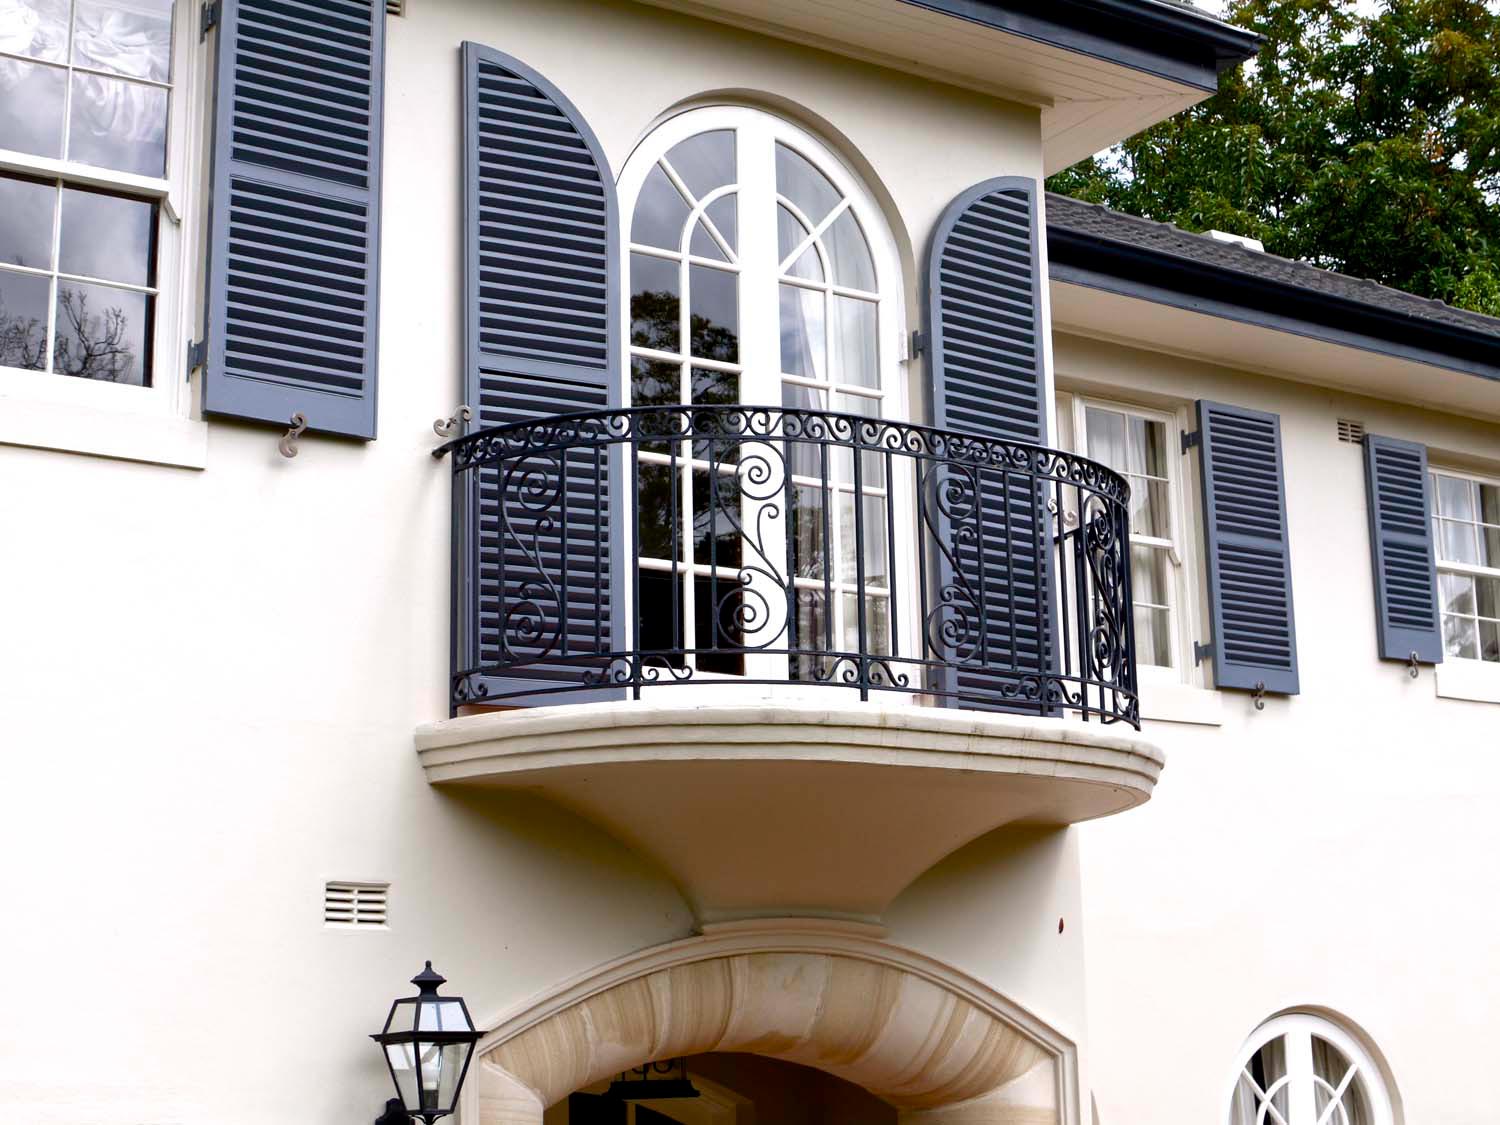 4 House architectural door design in french classic style, front doors and inside doors